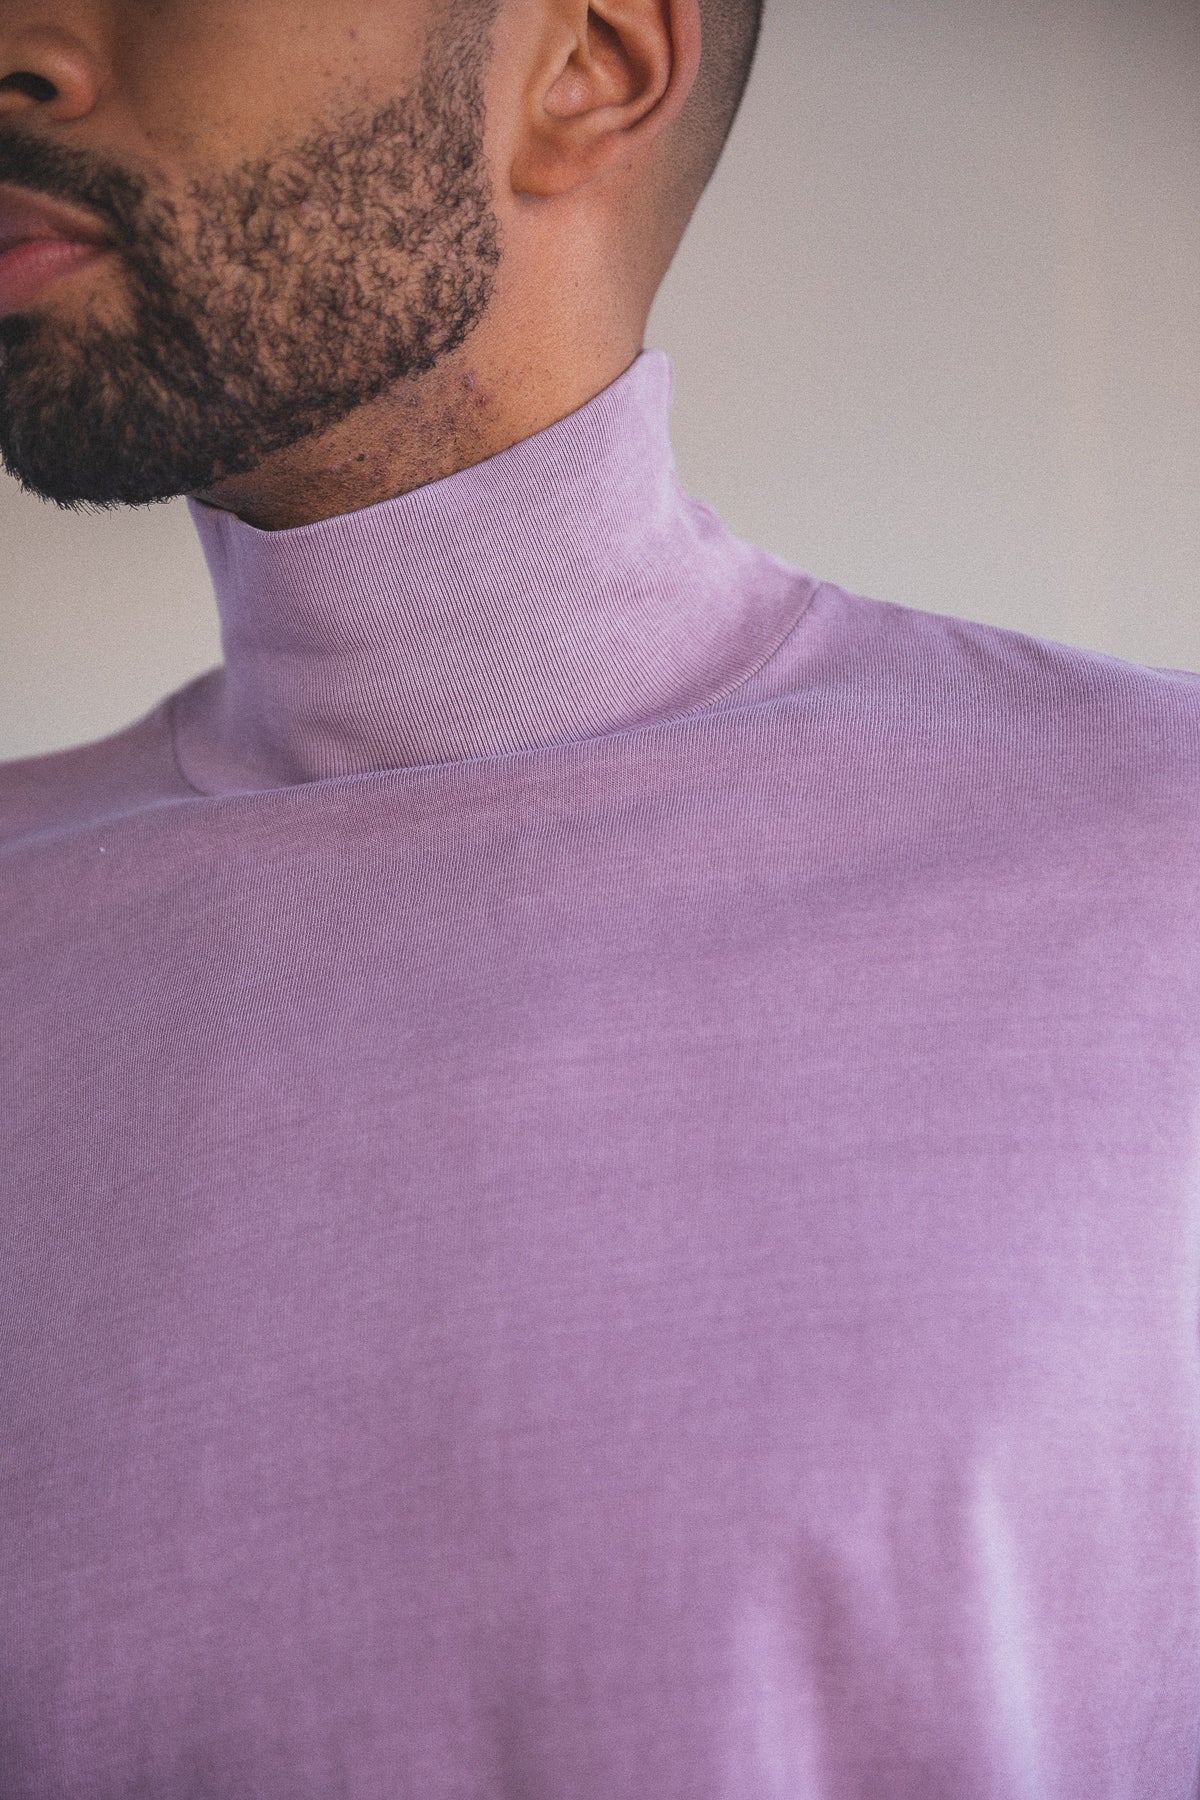 JERSEY TURTLENECK IN CLAY PINK